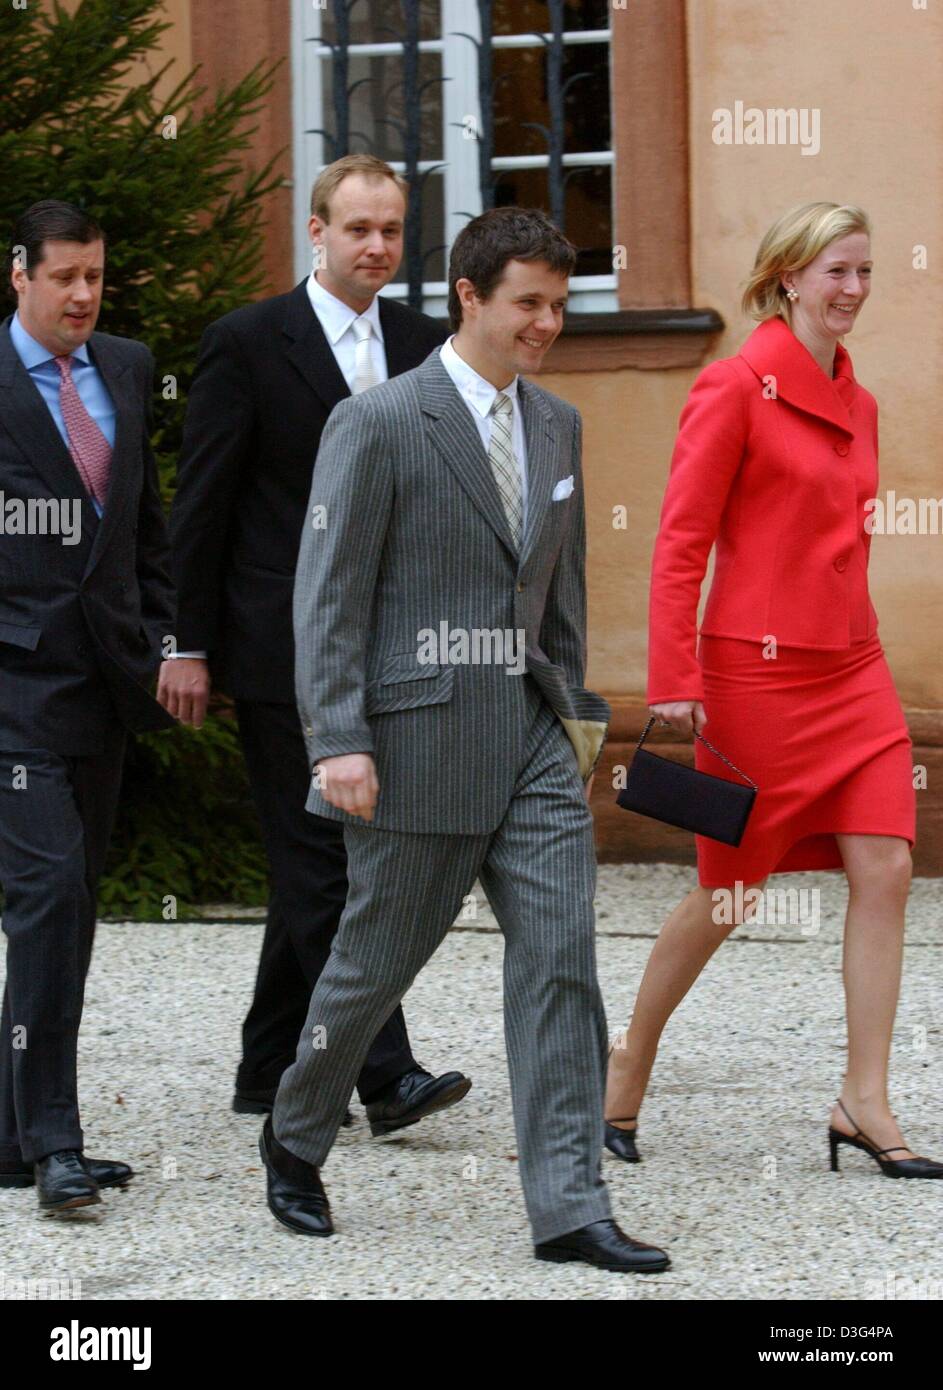 dpa-the-godparents-crown-prince-frederik-of-denmark-and-princess-nathalie-D3G4PA.jpg